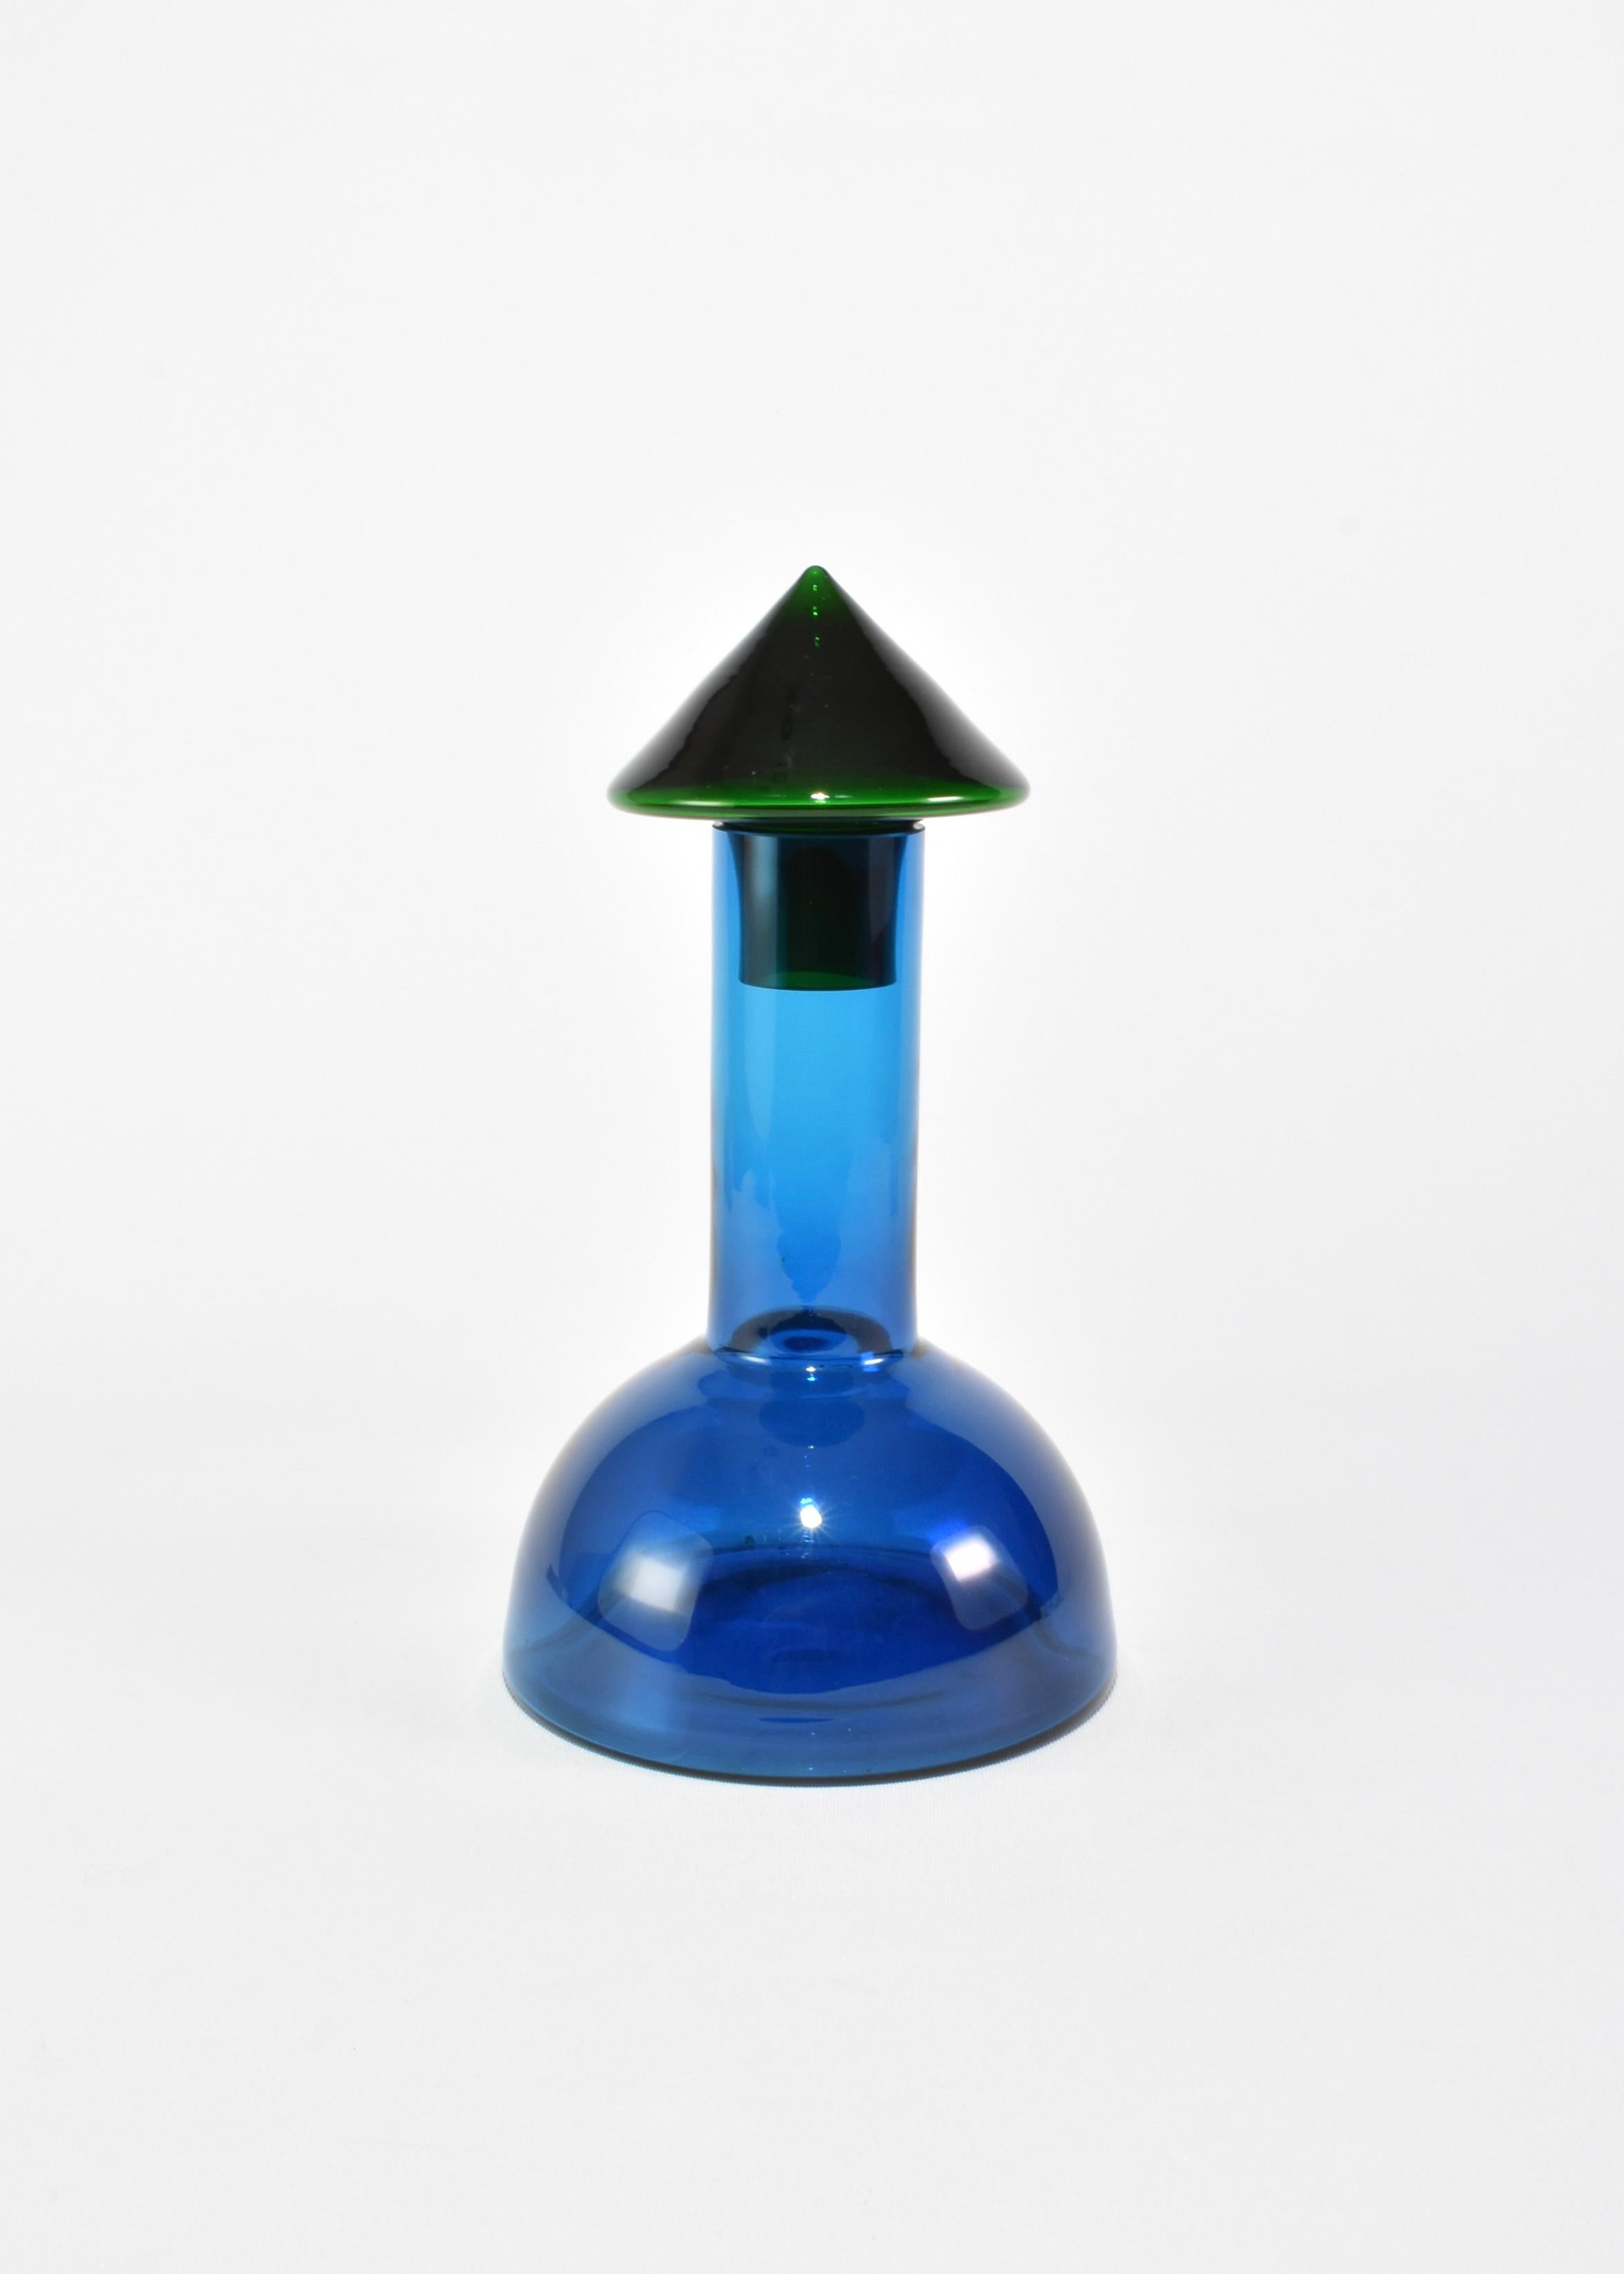 Sculptural glass decanter in blue with a green conical top. Original sticker reads V. Nason & C. Murano Italy.